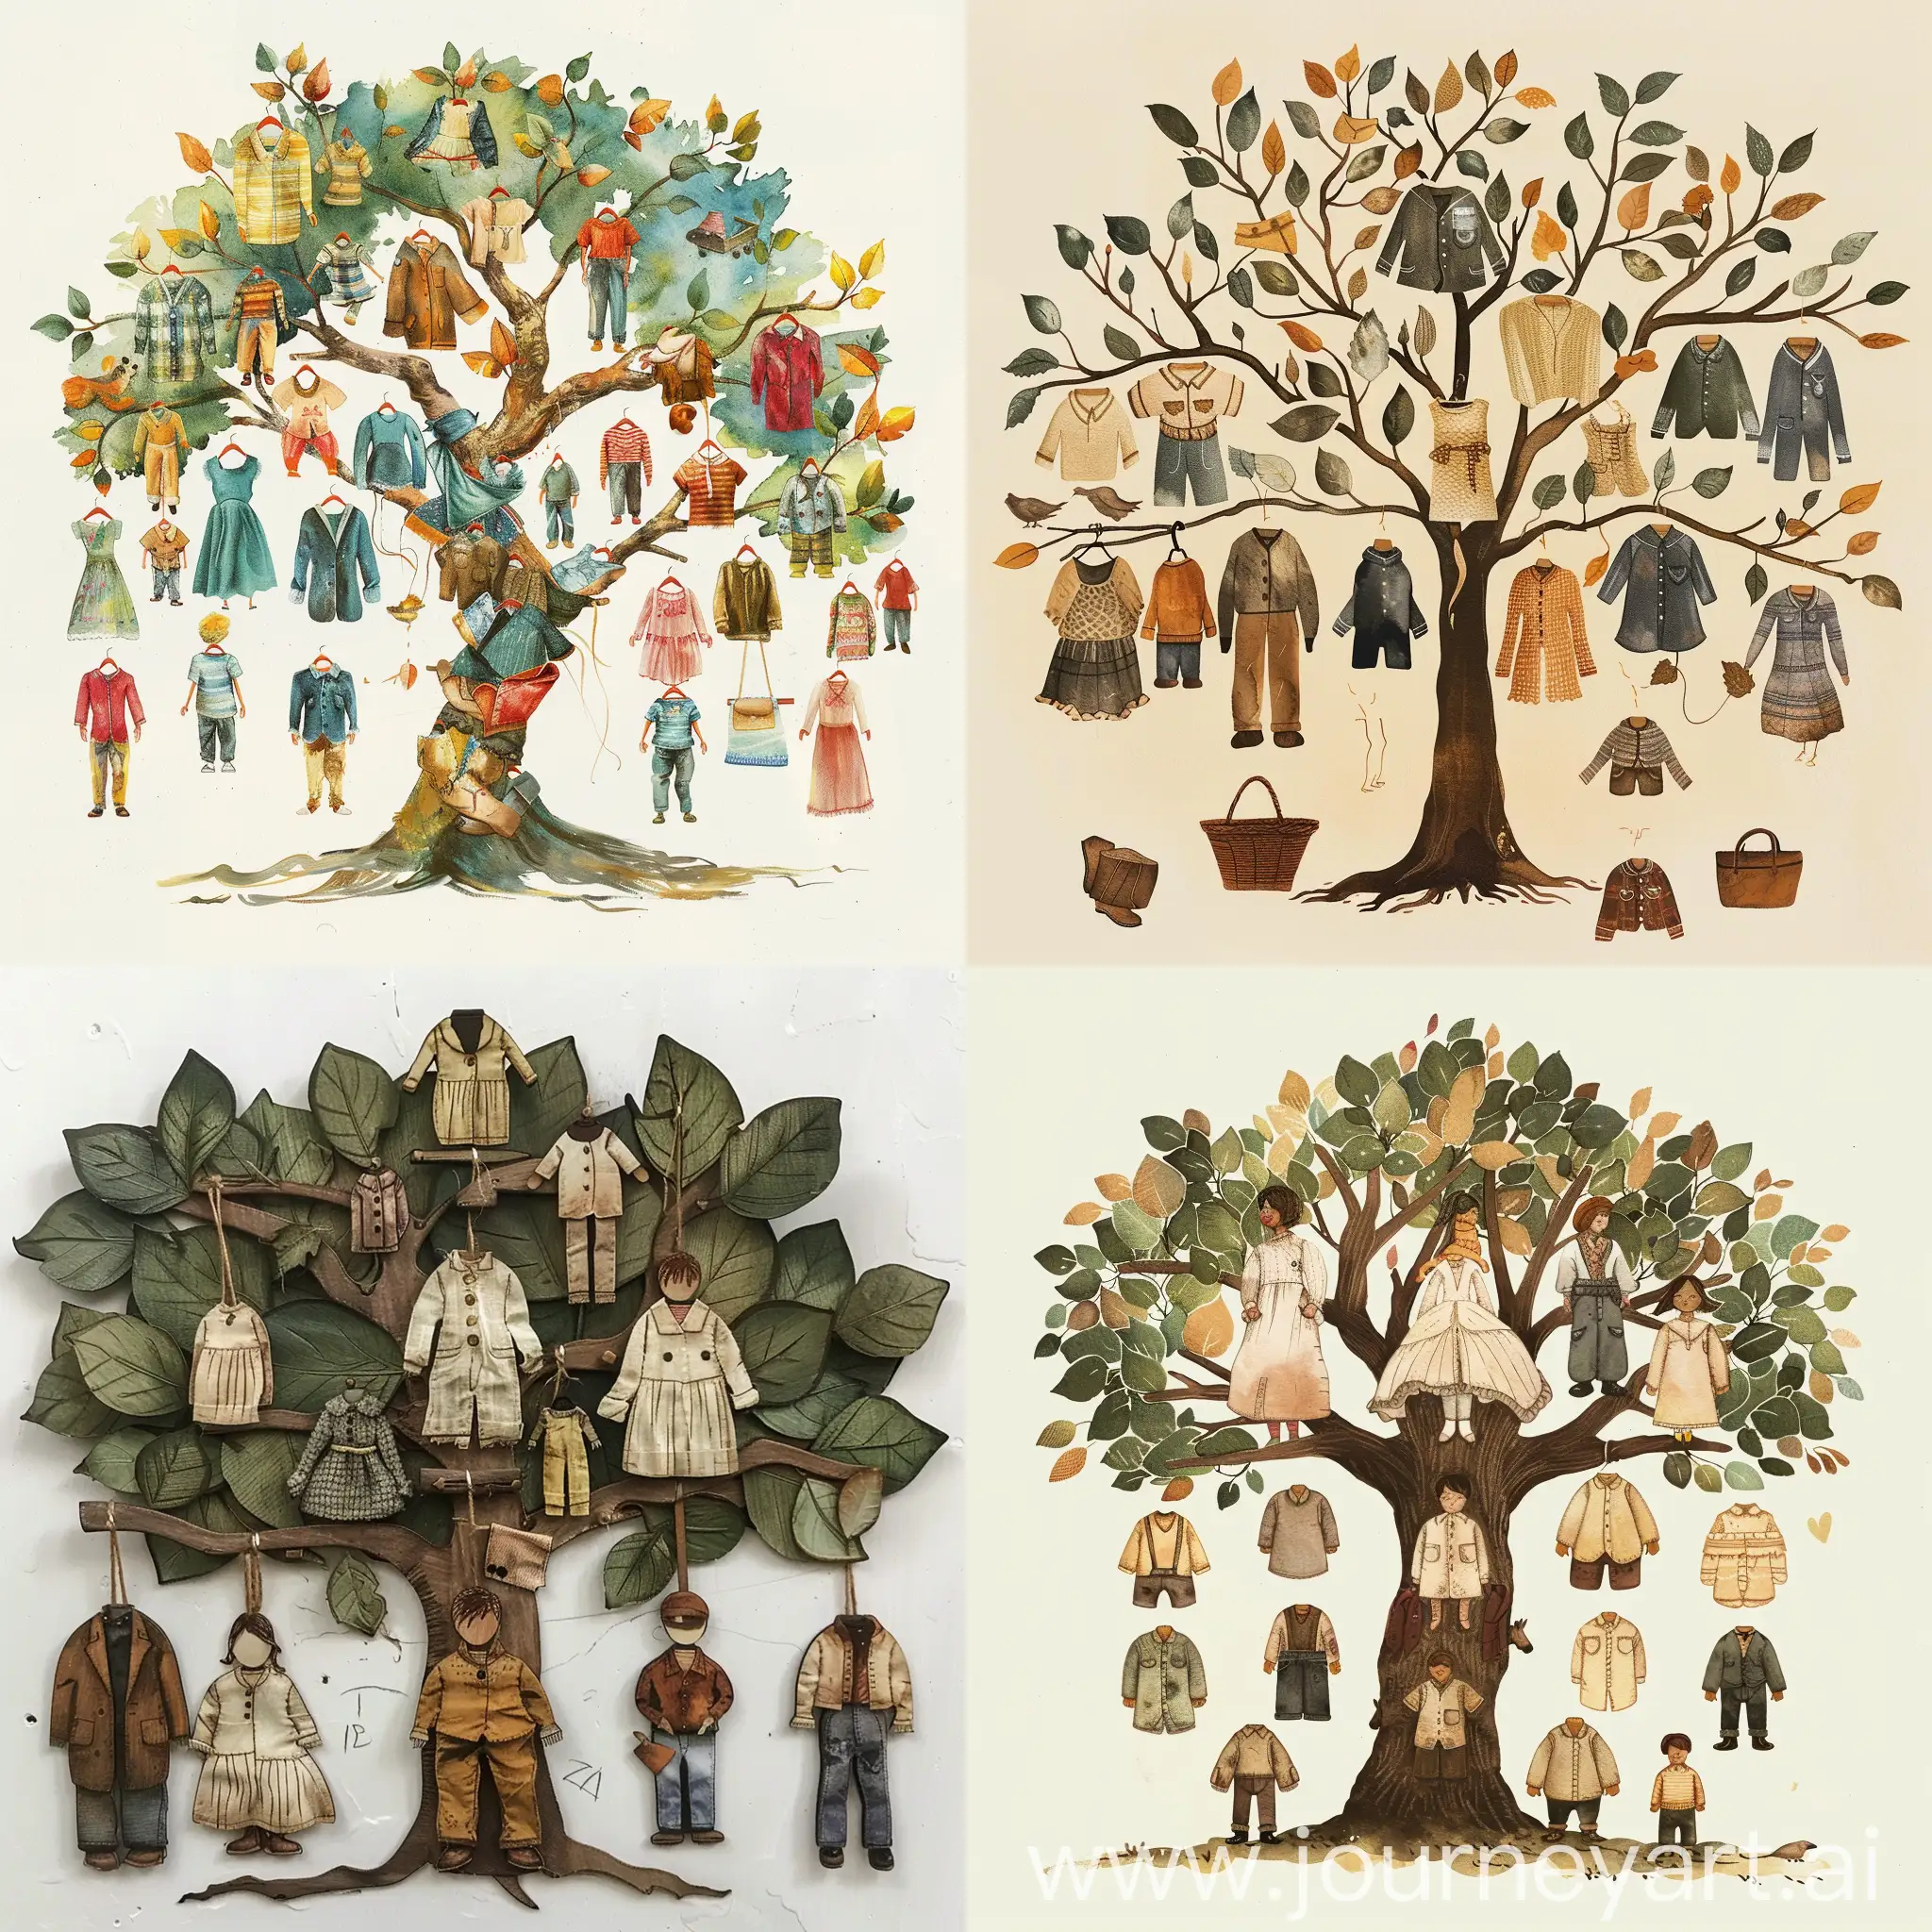 A1-Adult-Learning-Worn-Clothes-Family-Tree